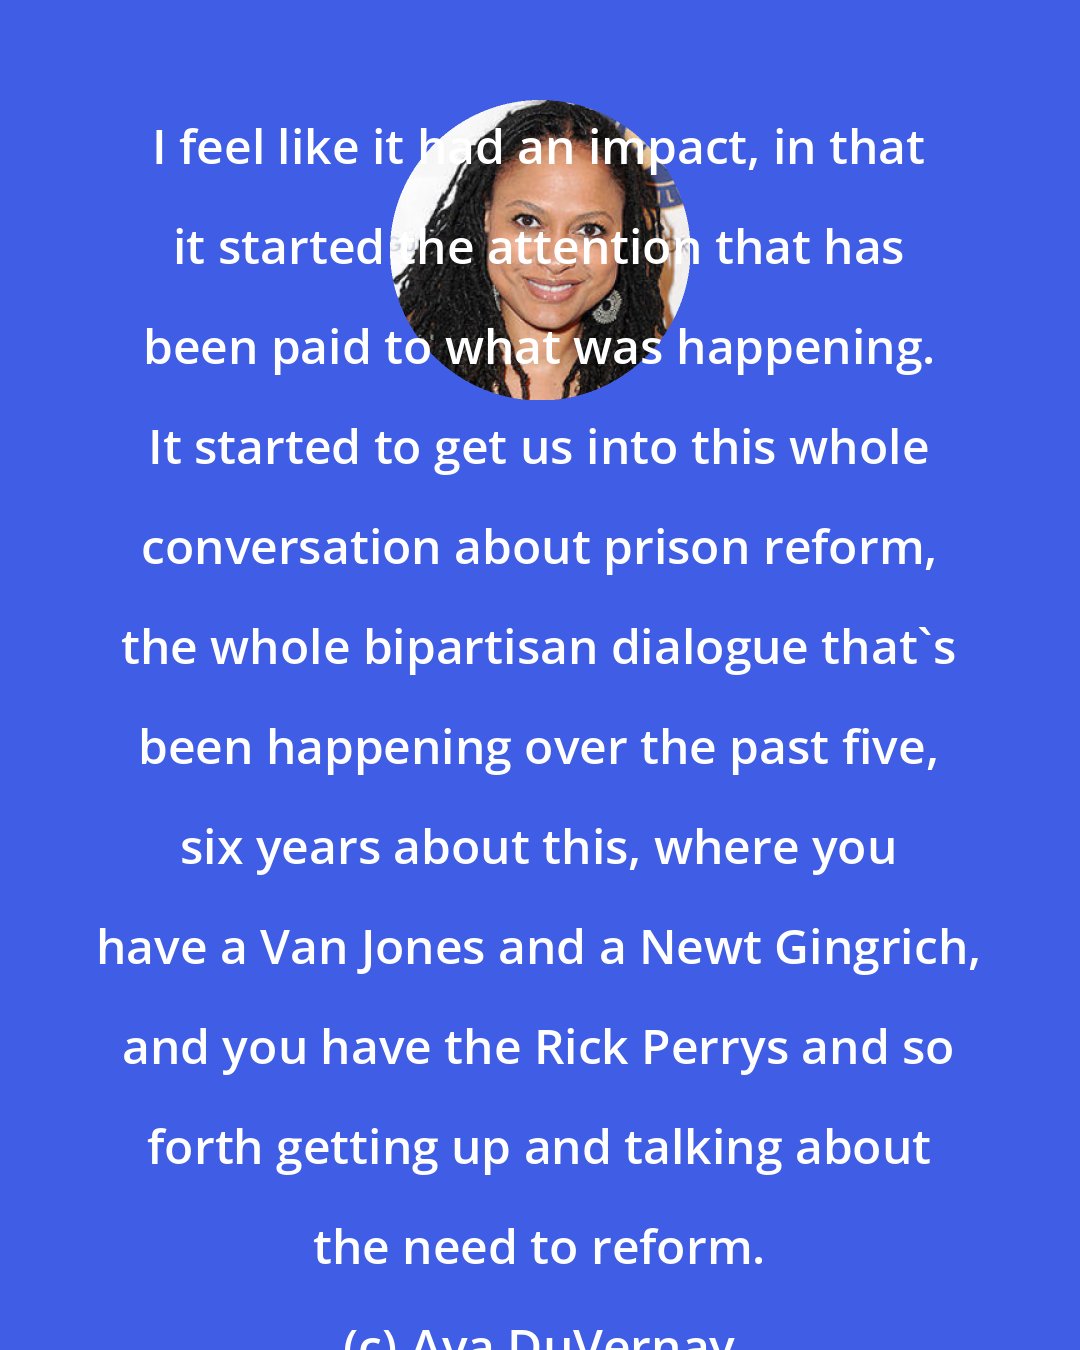 Ava DuVernay: I feel like it had an impact, in that it started the attention that has been paid to what was happening. It started to get us into this whole conversation about prison reform, the whole bipartisan dialogue that's been happening over the past five, six years about this, where you have a Van Jones and a Newt Gingrich, and you have the Rick Perrys and so forth getting up and talking about the need to reform.